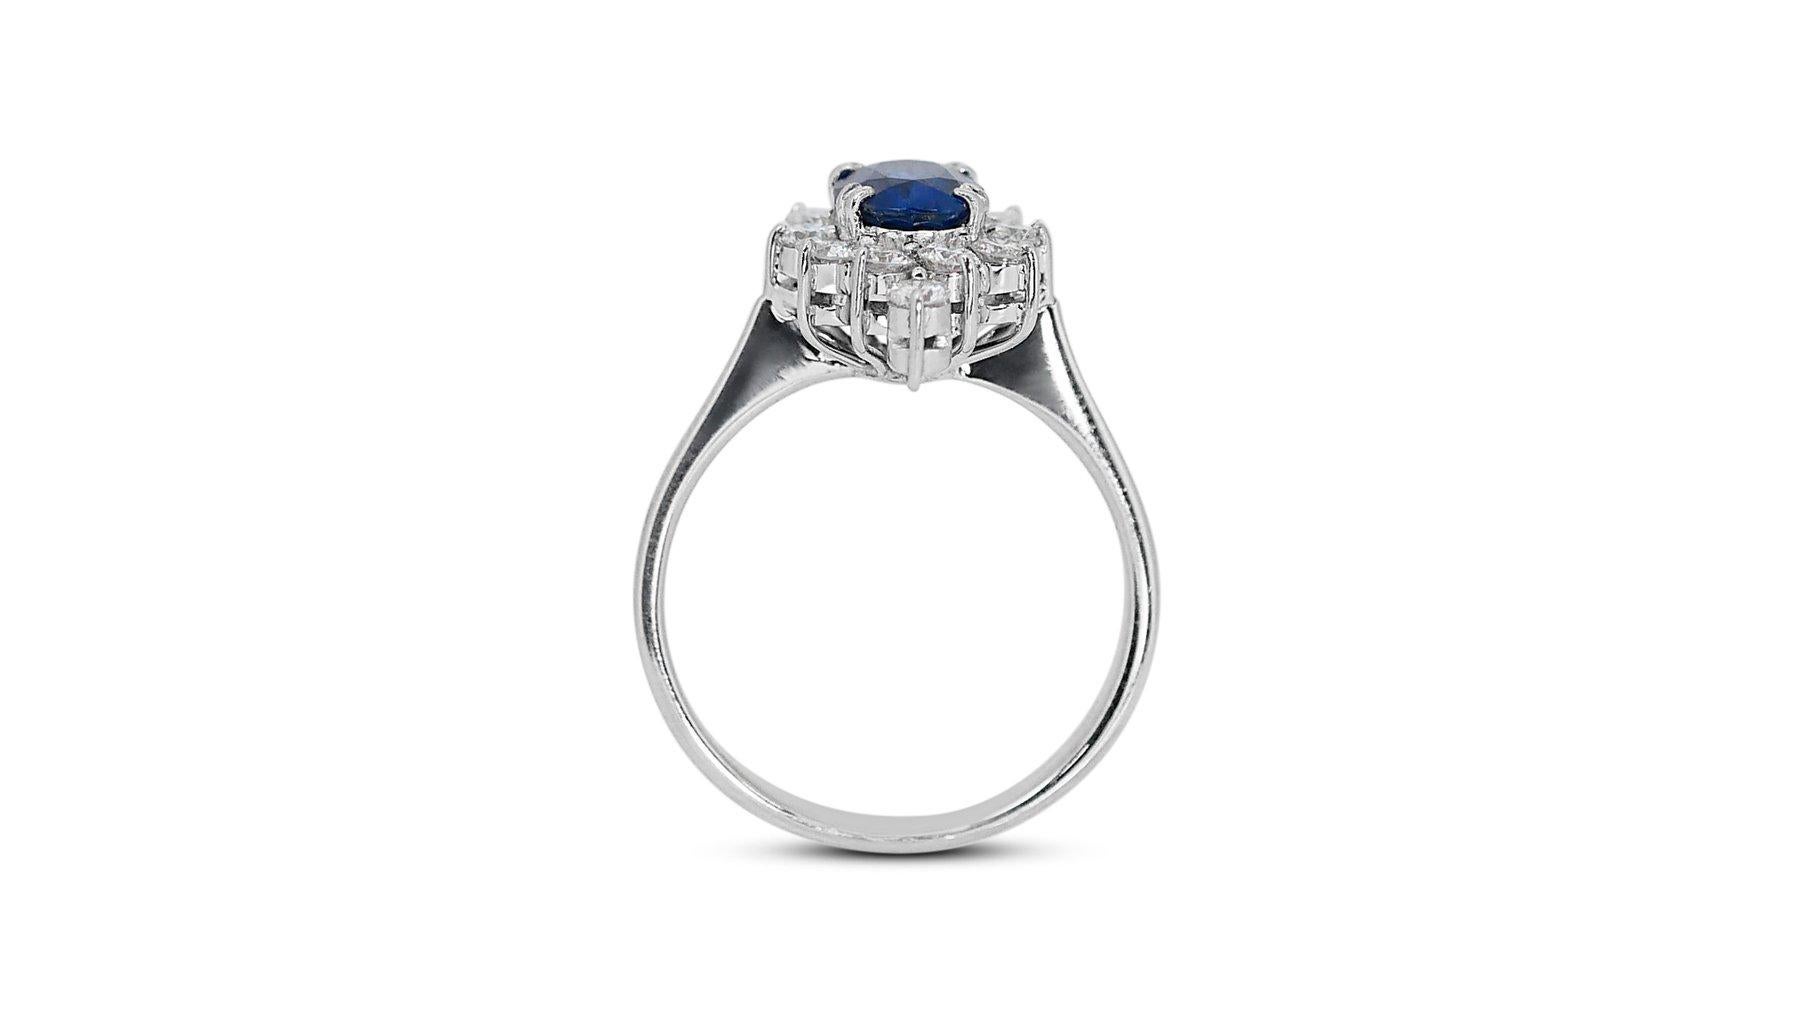 Lovely 1.37 carat oval natural sapphire ring in 18K white gold 4